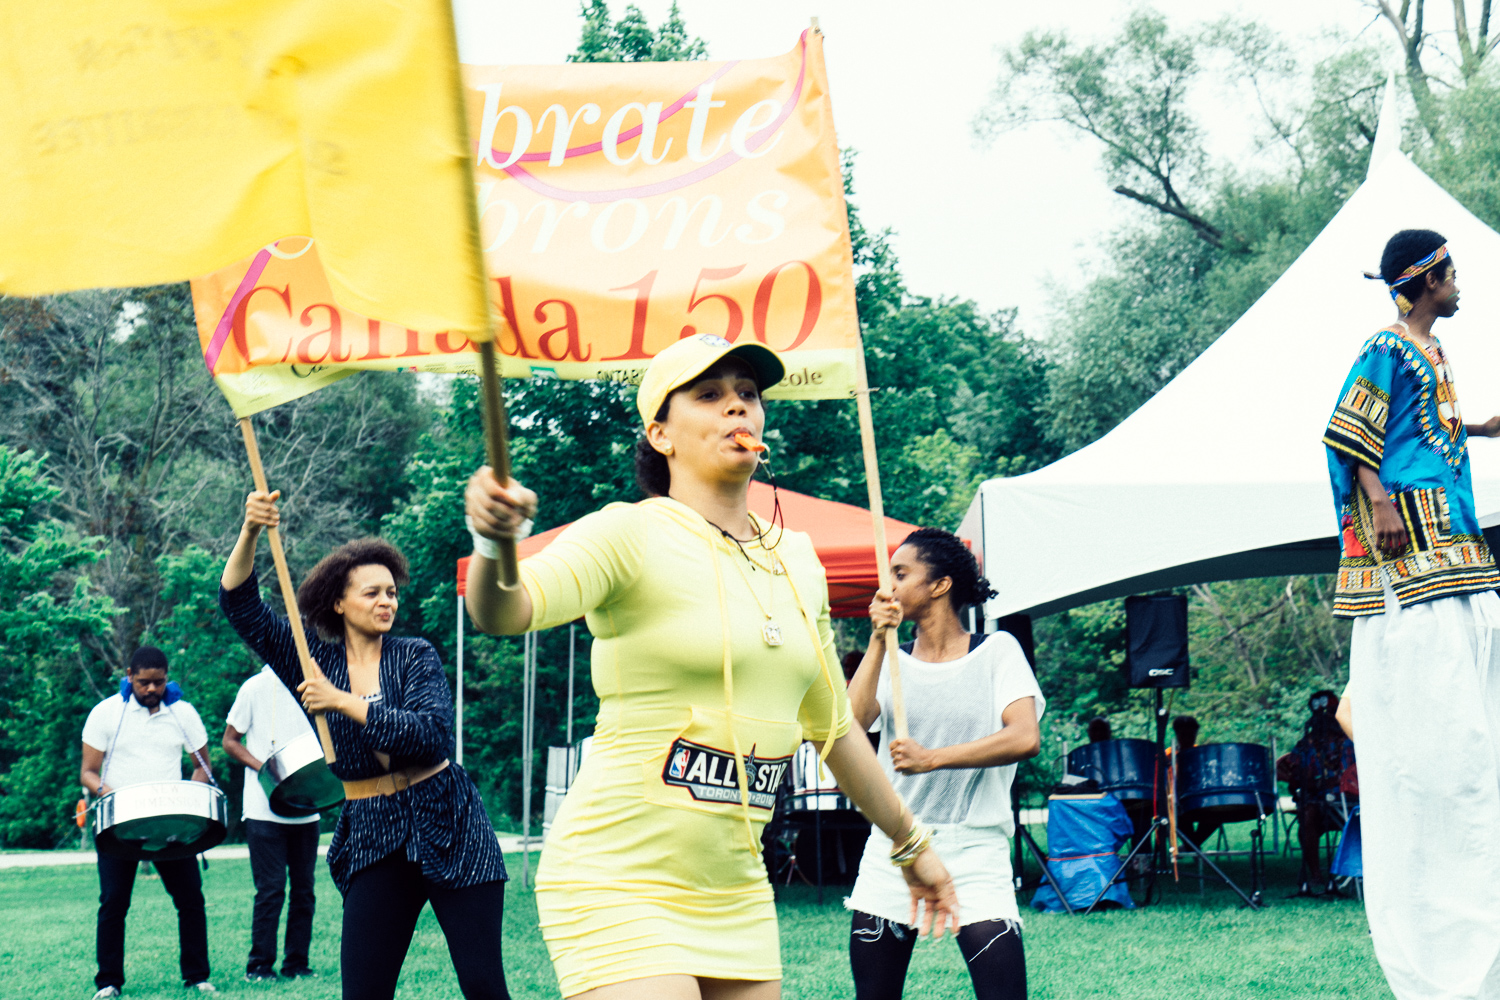 A group of women carry bright yellow flags across a field.